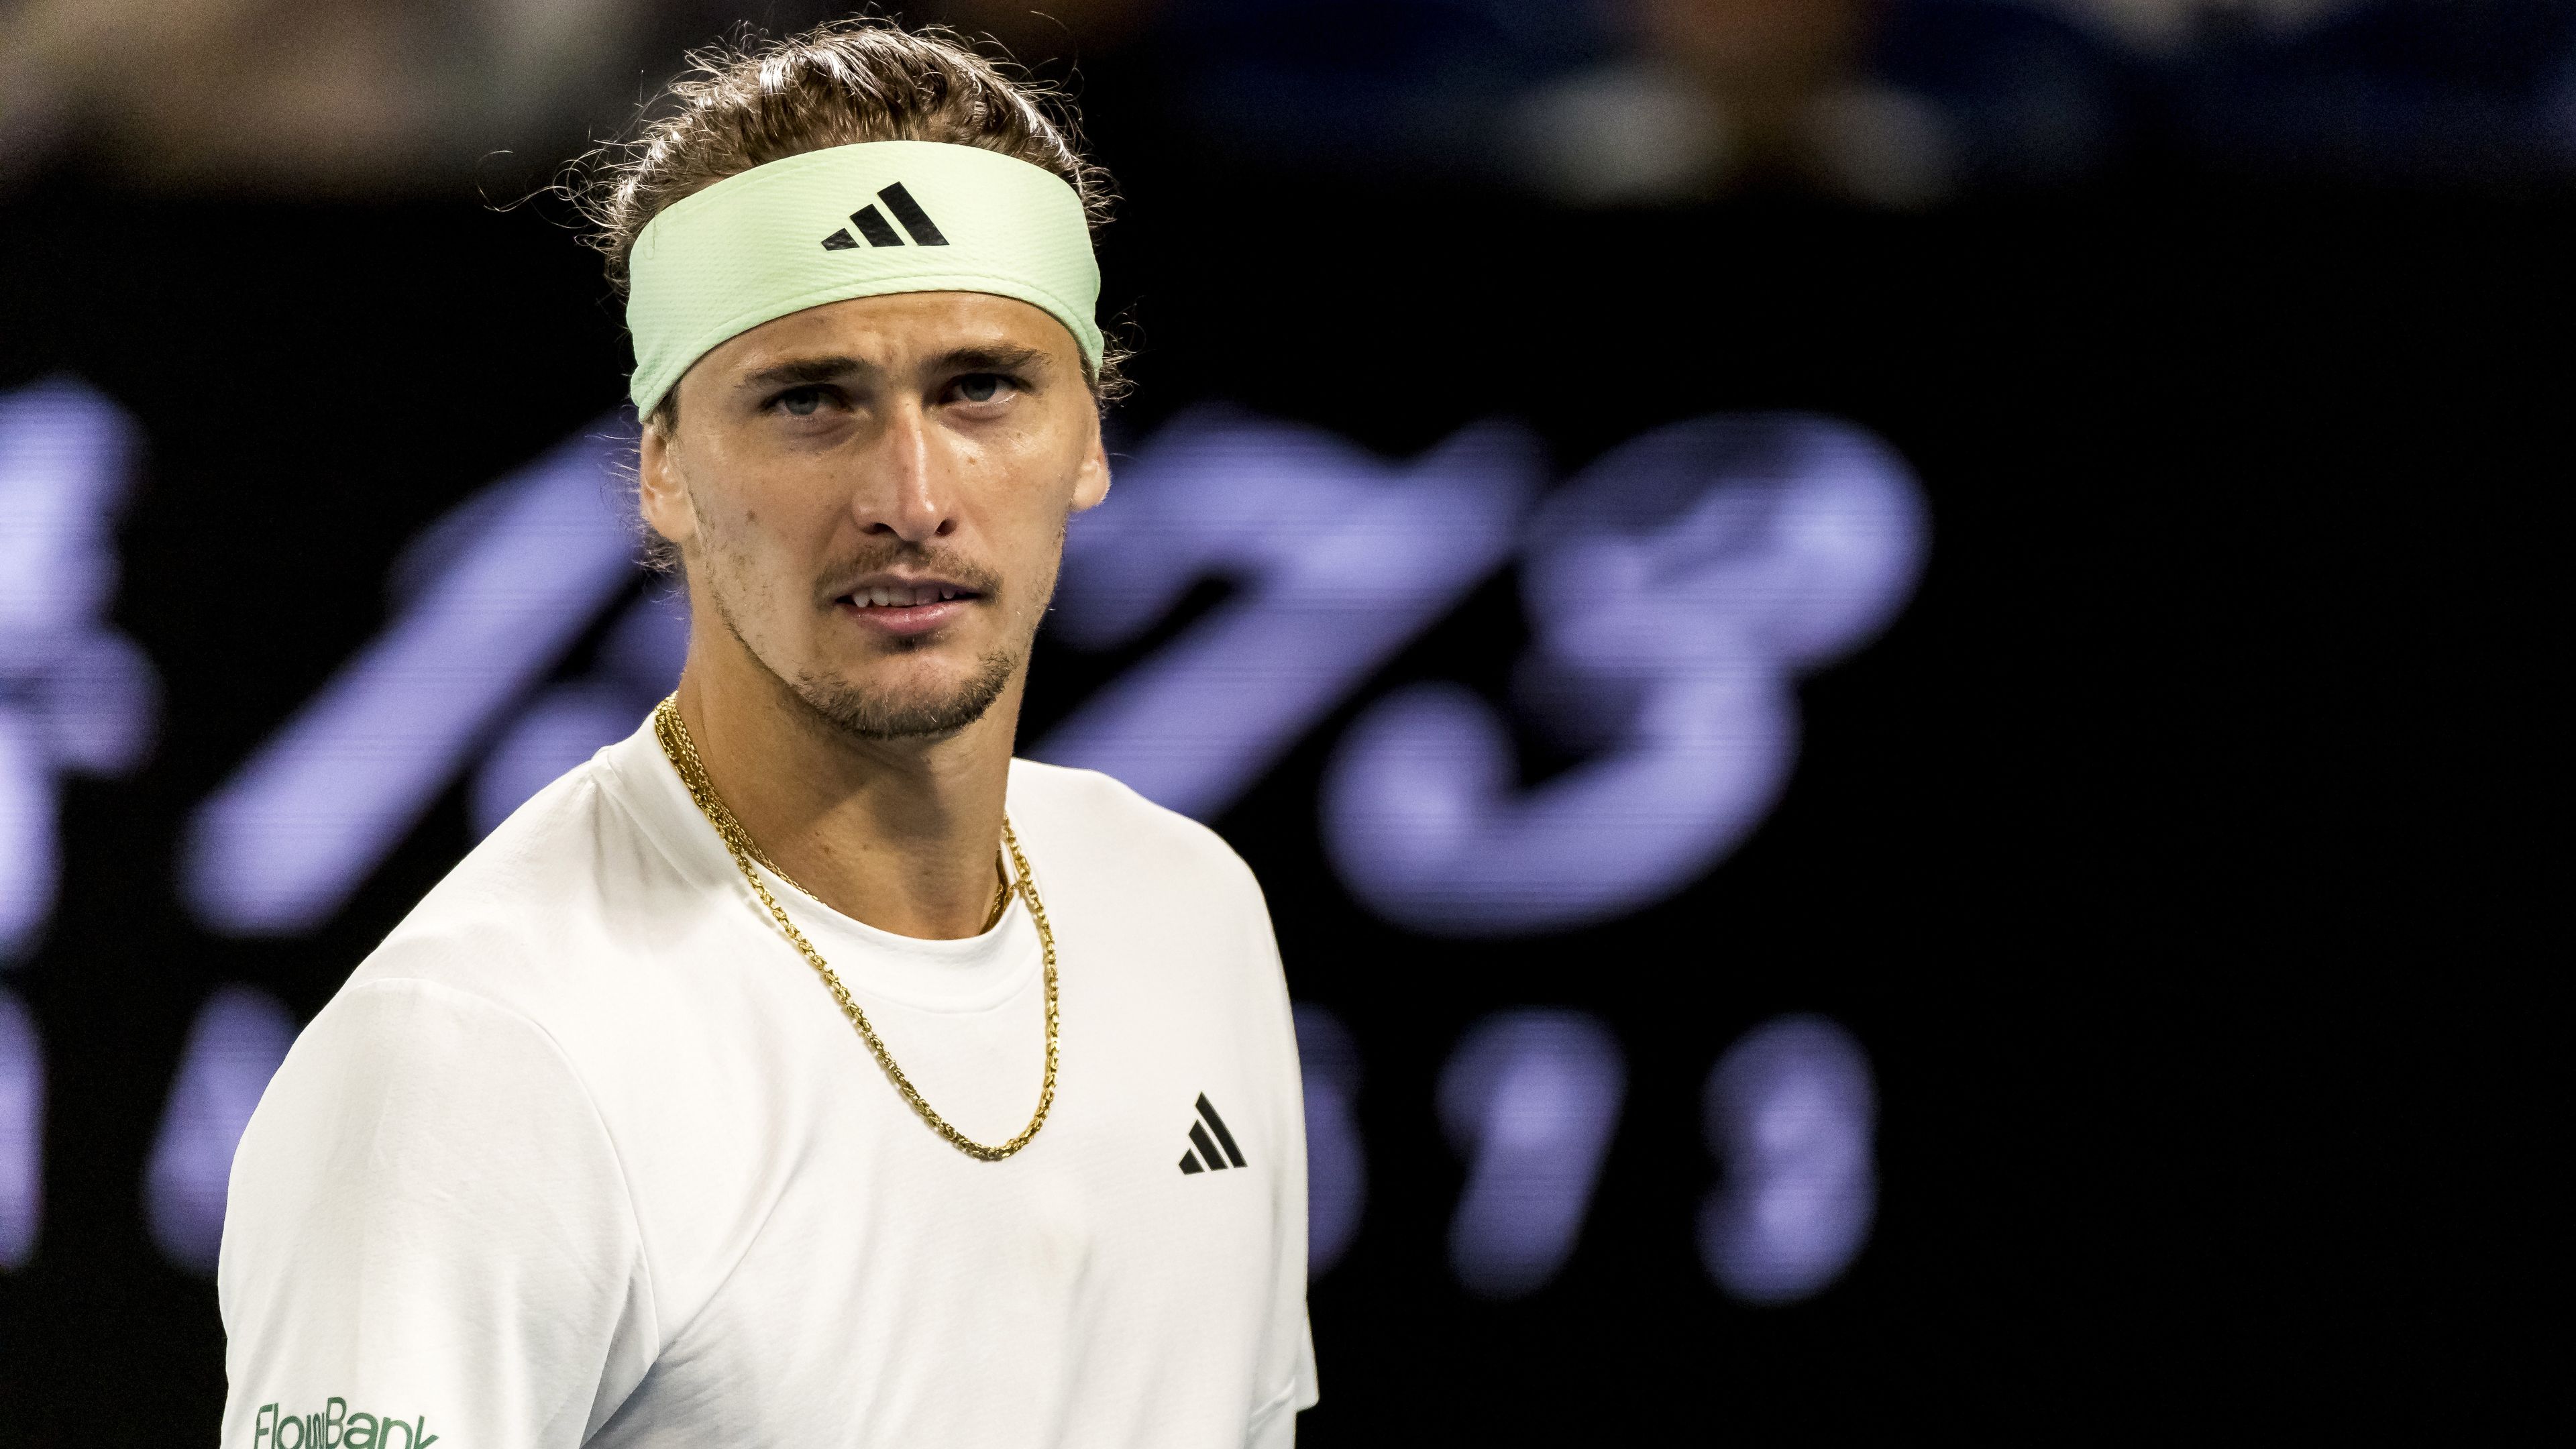 EXCLUSIVE: Great 'feels sorry' for Alexander Zverev after mental fragility resurfaces